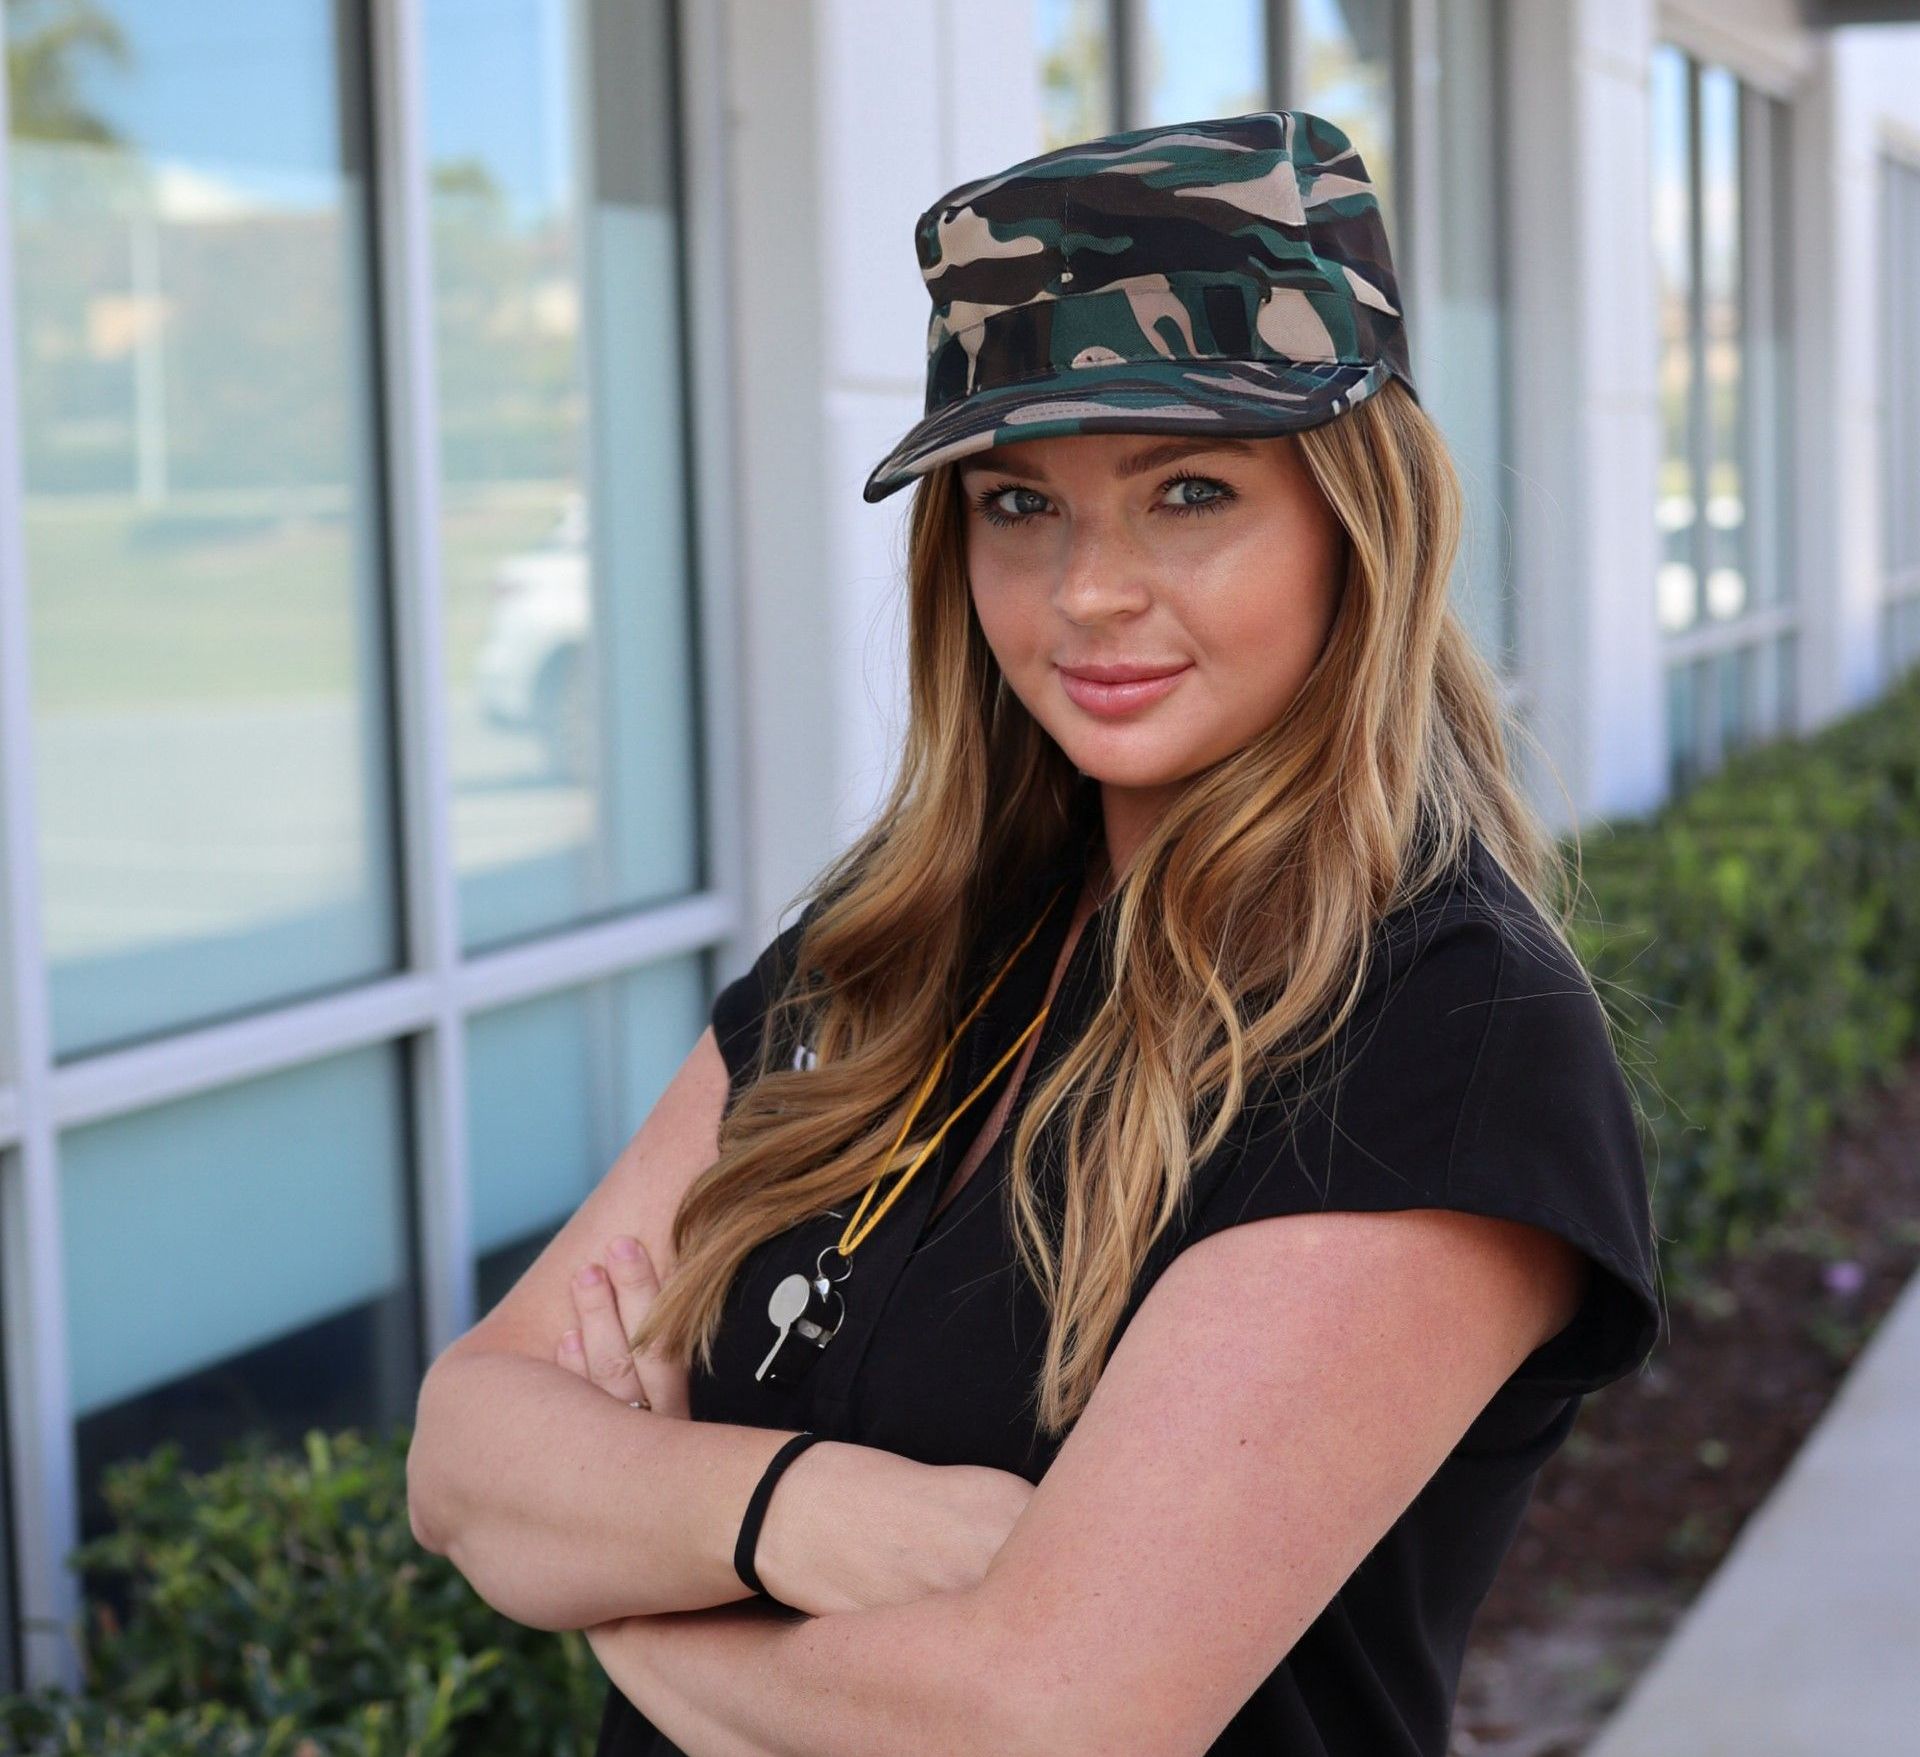 Medical Esthetician Brittnee Thomas, the Drill Sergeant of MK Bootcamp, prepares to guide attendees through a transformative skin care regimen at Windermere Medical Spa & Laser Institute in Orlando